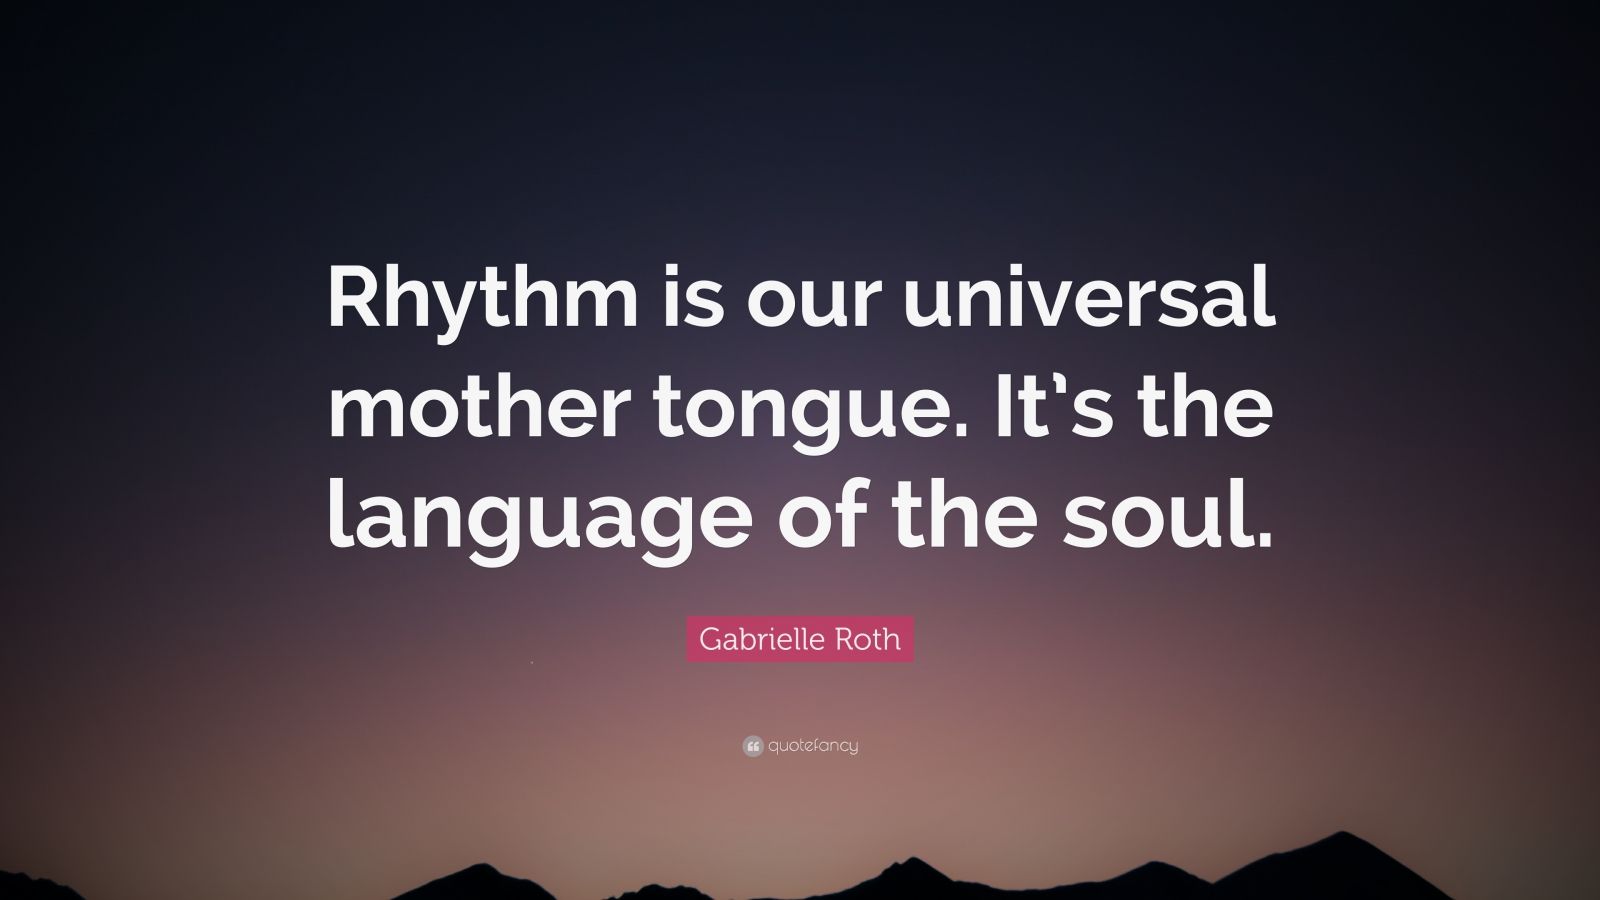 Gabrielle Roth Quote: “Rhythm is our universal mother tongue. It’s the